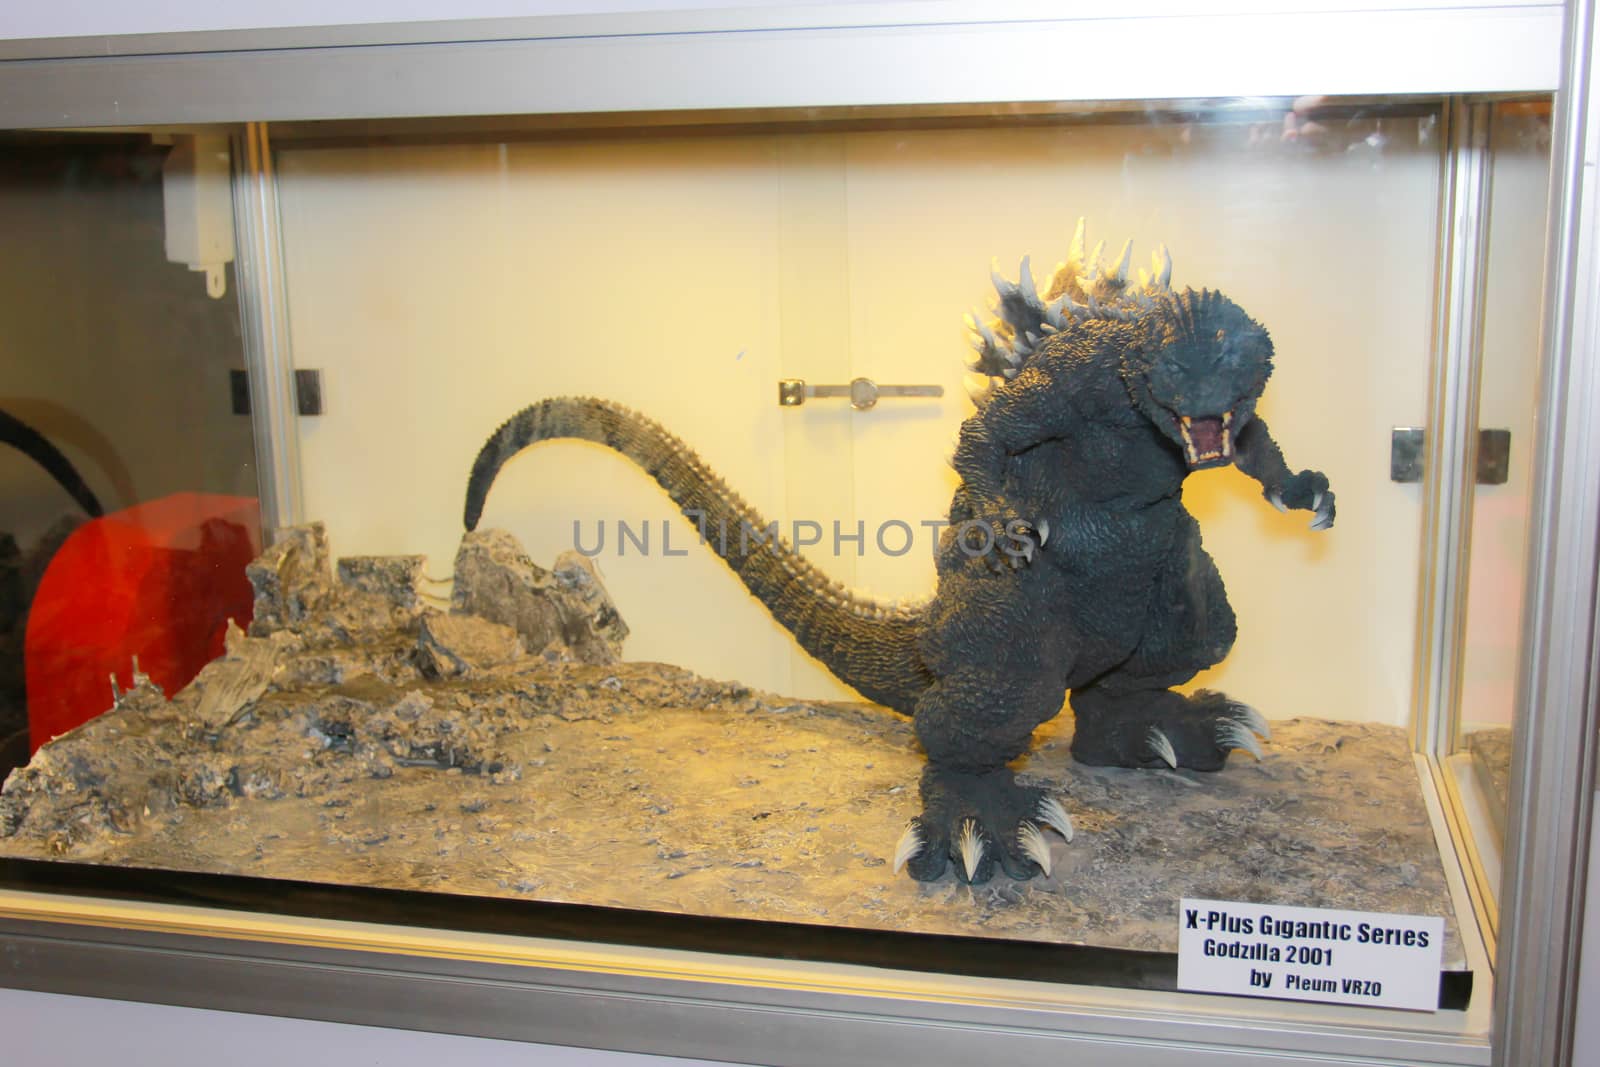 A model of the character Godzilla from the movies and comics  by redthirteen